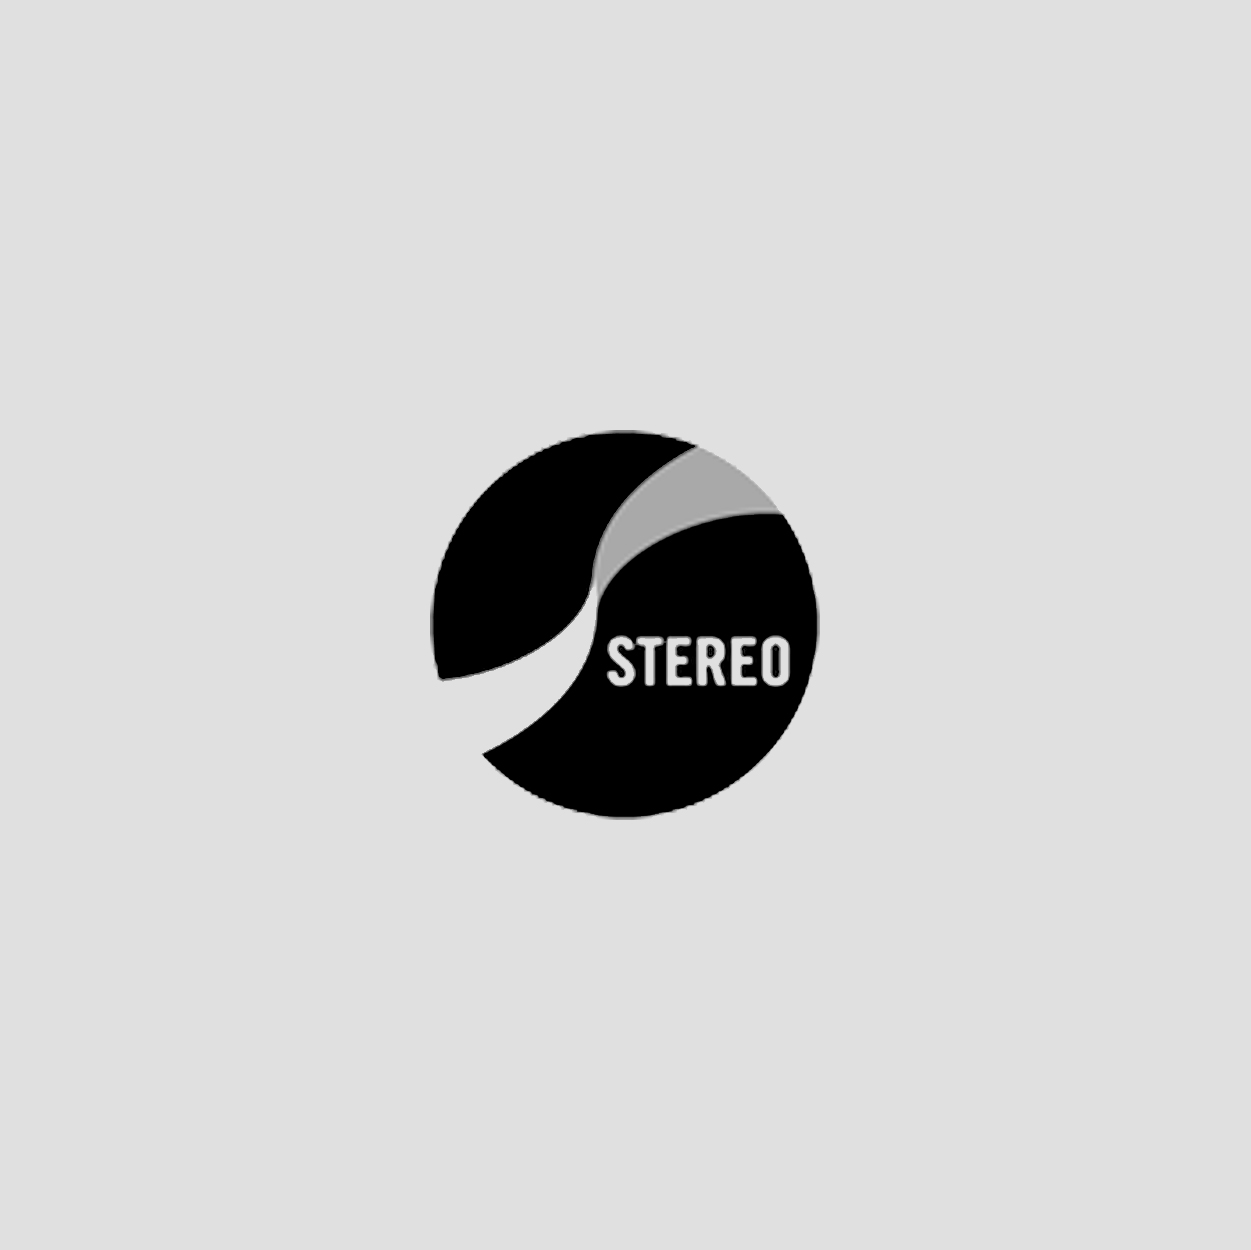 Stereo Wallpapers